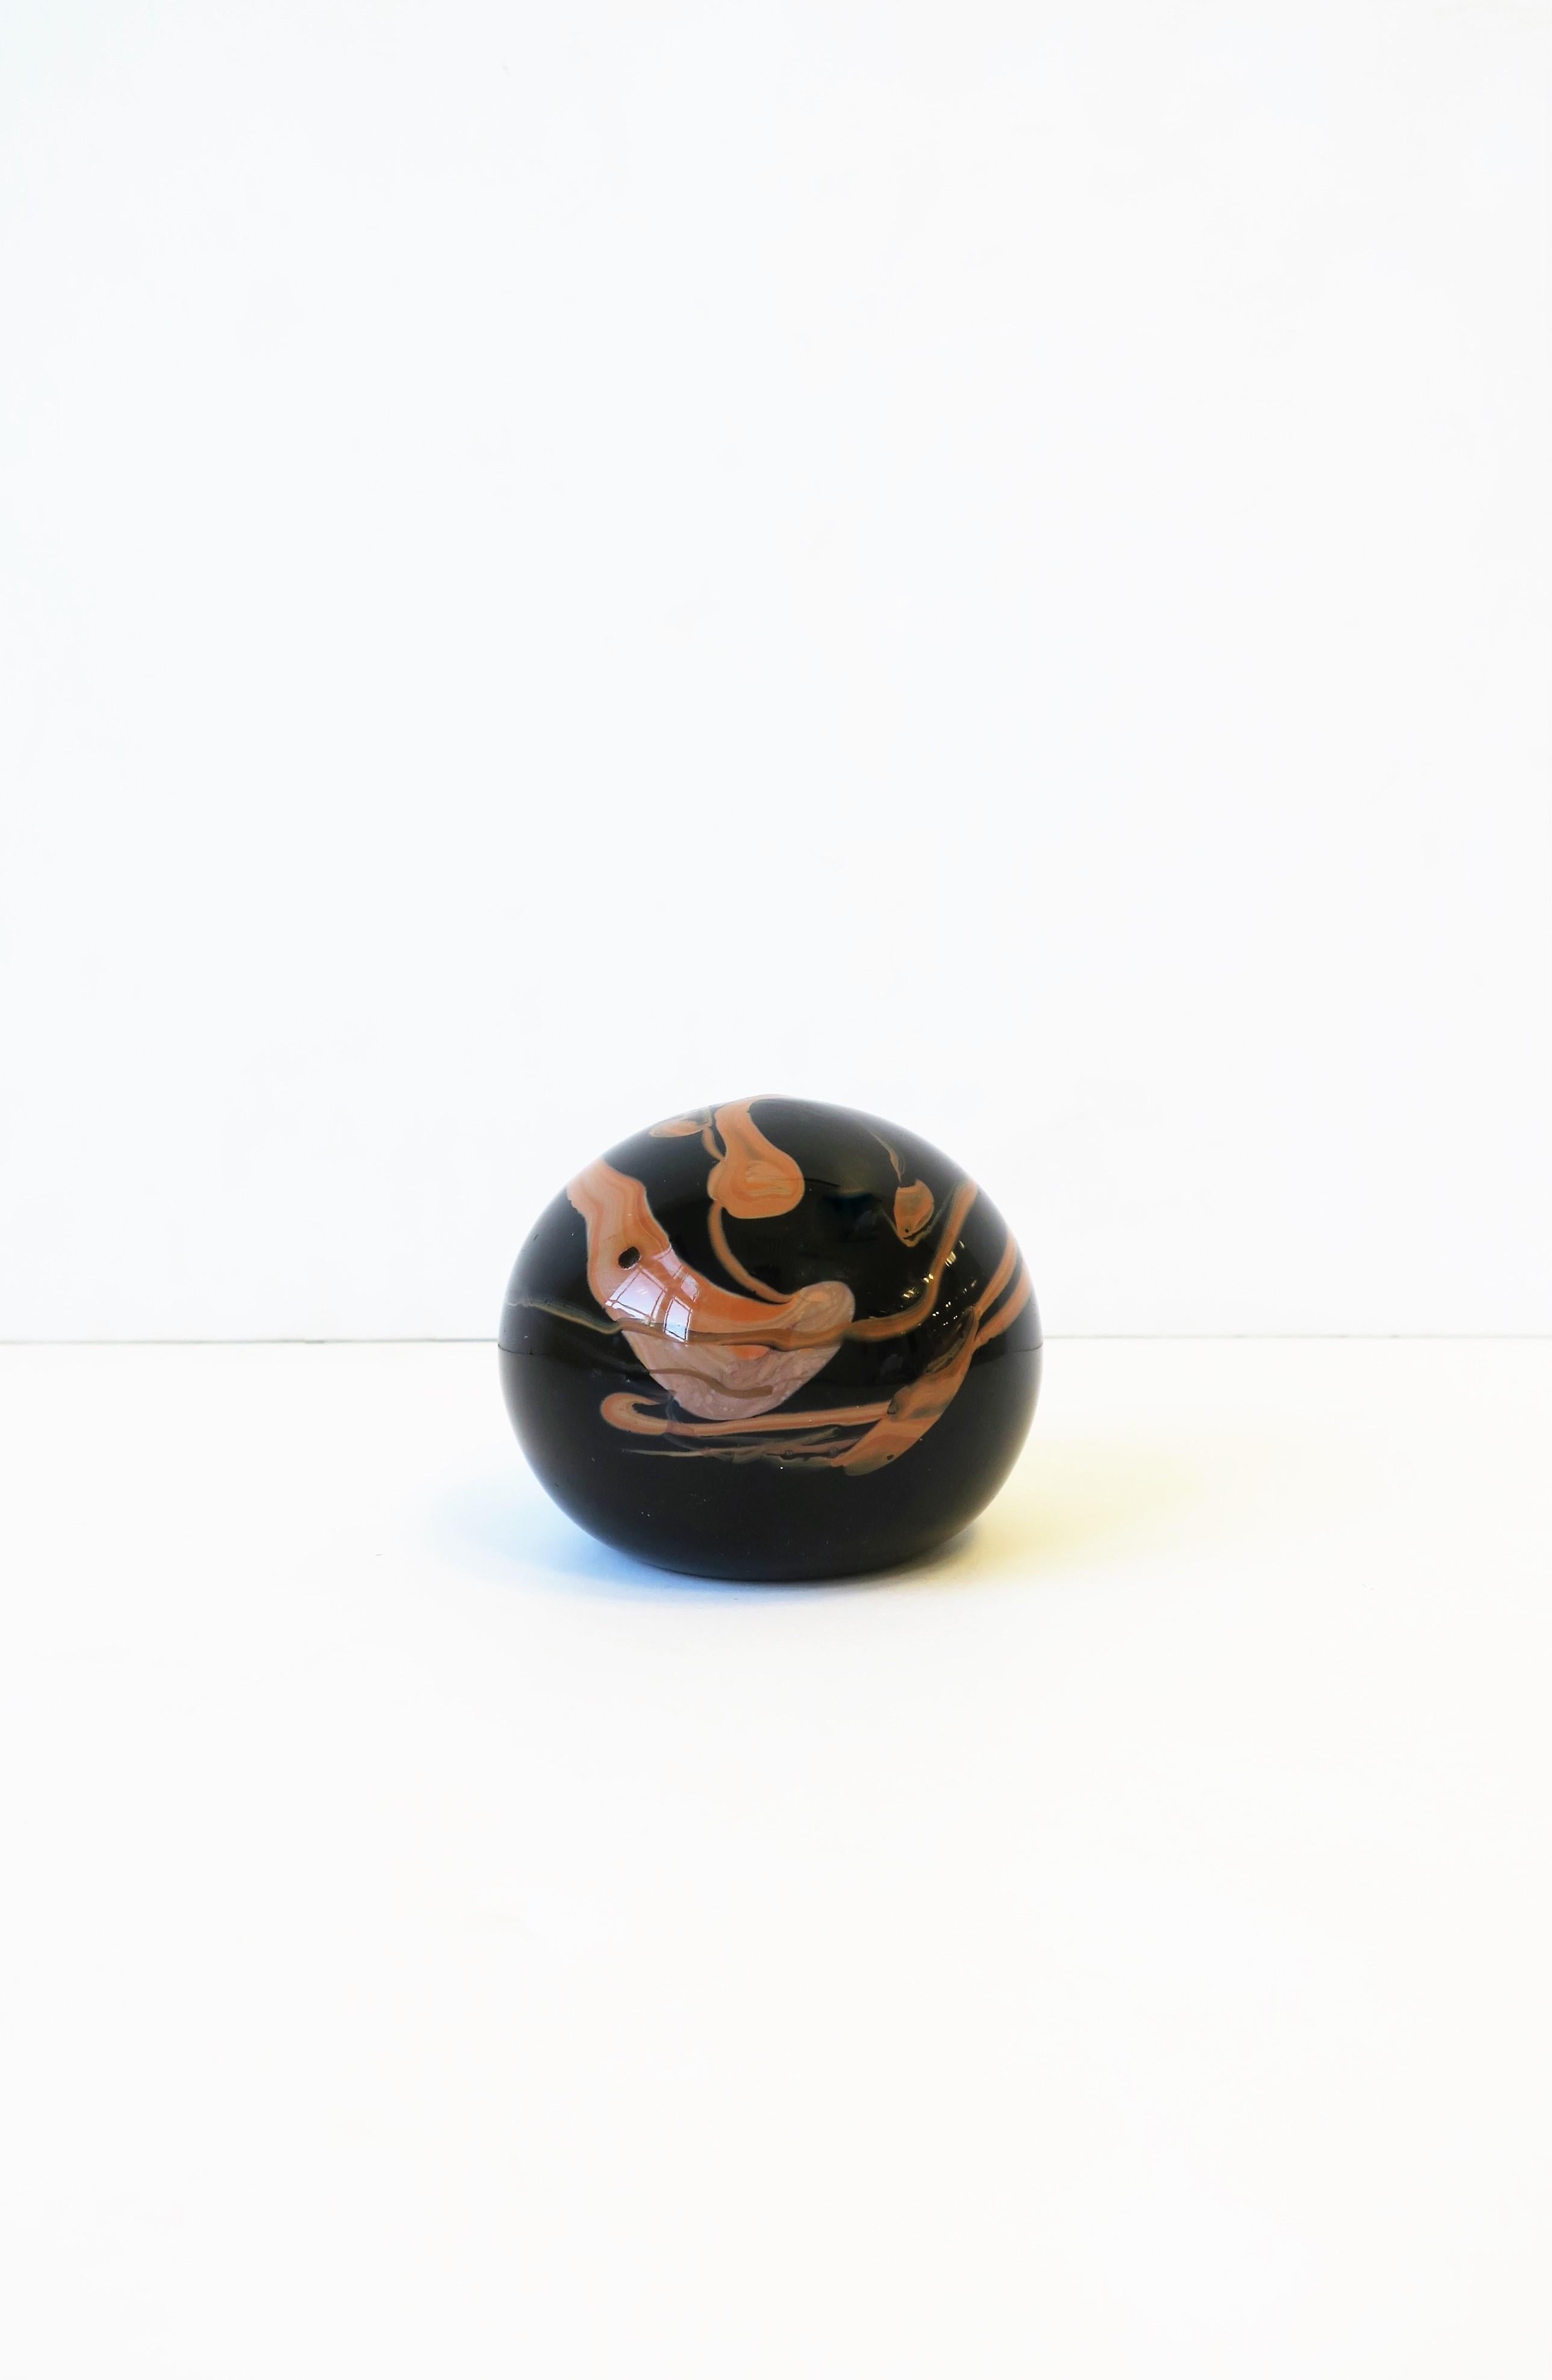 A beautiful Modern/Postmodern black and neutral flesh-tone art glass decorative object or paperweight with an organic modern design, circa 1970s. This handmade art glass coloring and design resembles that of Italian Portoro marble. A great piece for